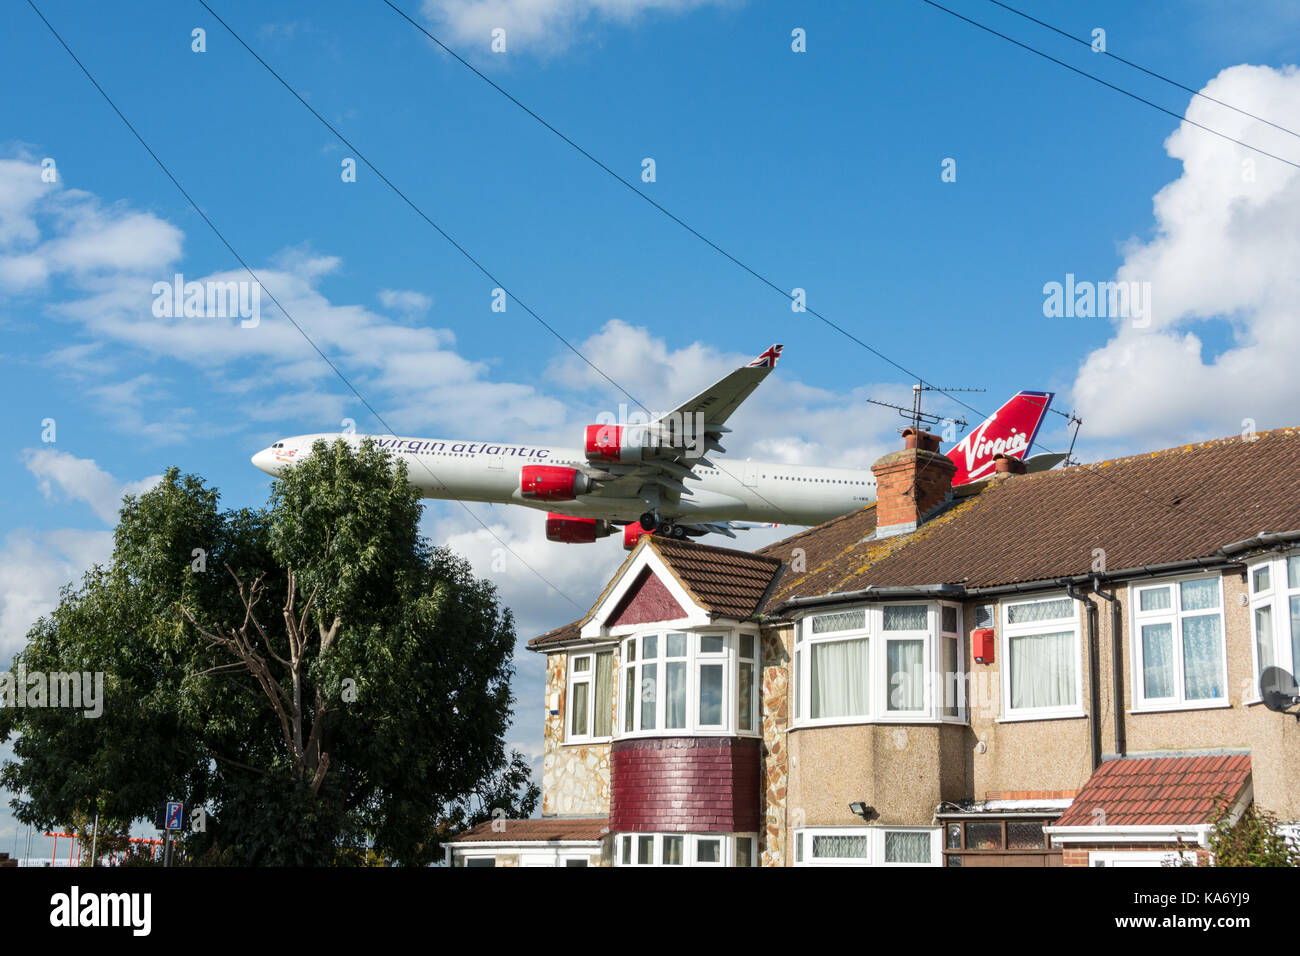 A Virgin Atlantic jet plane coming in to land as it flies over houses on Myrtle Avenue, in Hounslow, before landing at Heathrow Airport, Terminal 4. Stock Photo